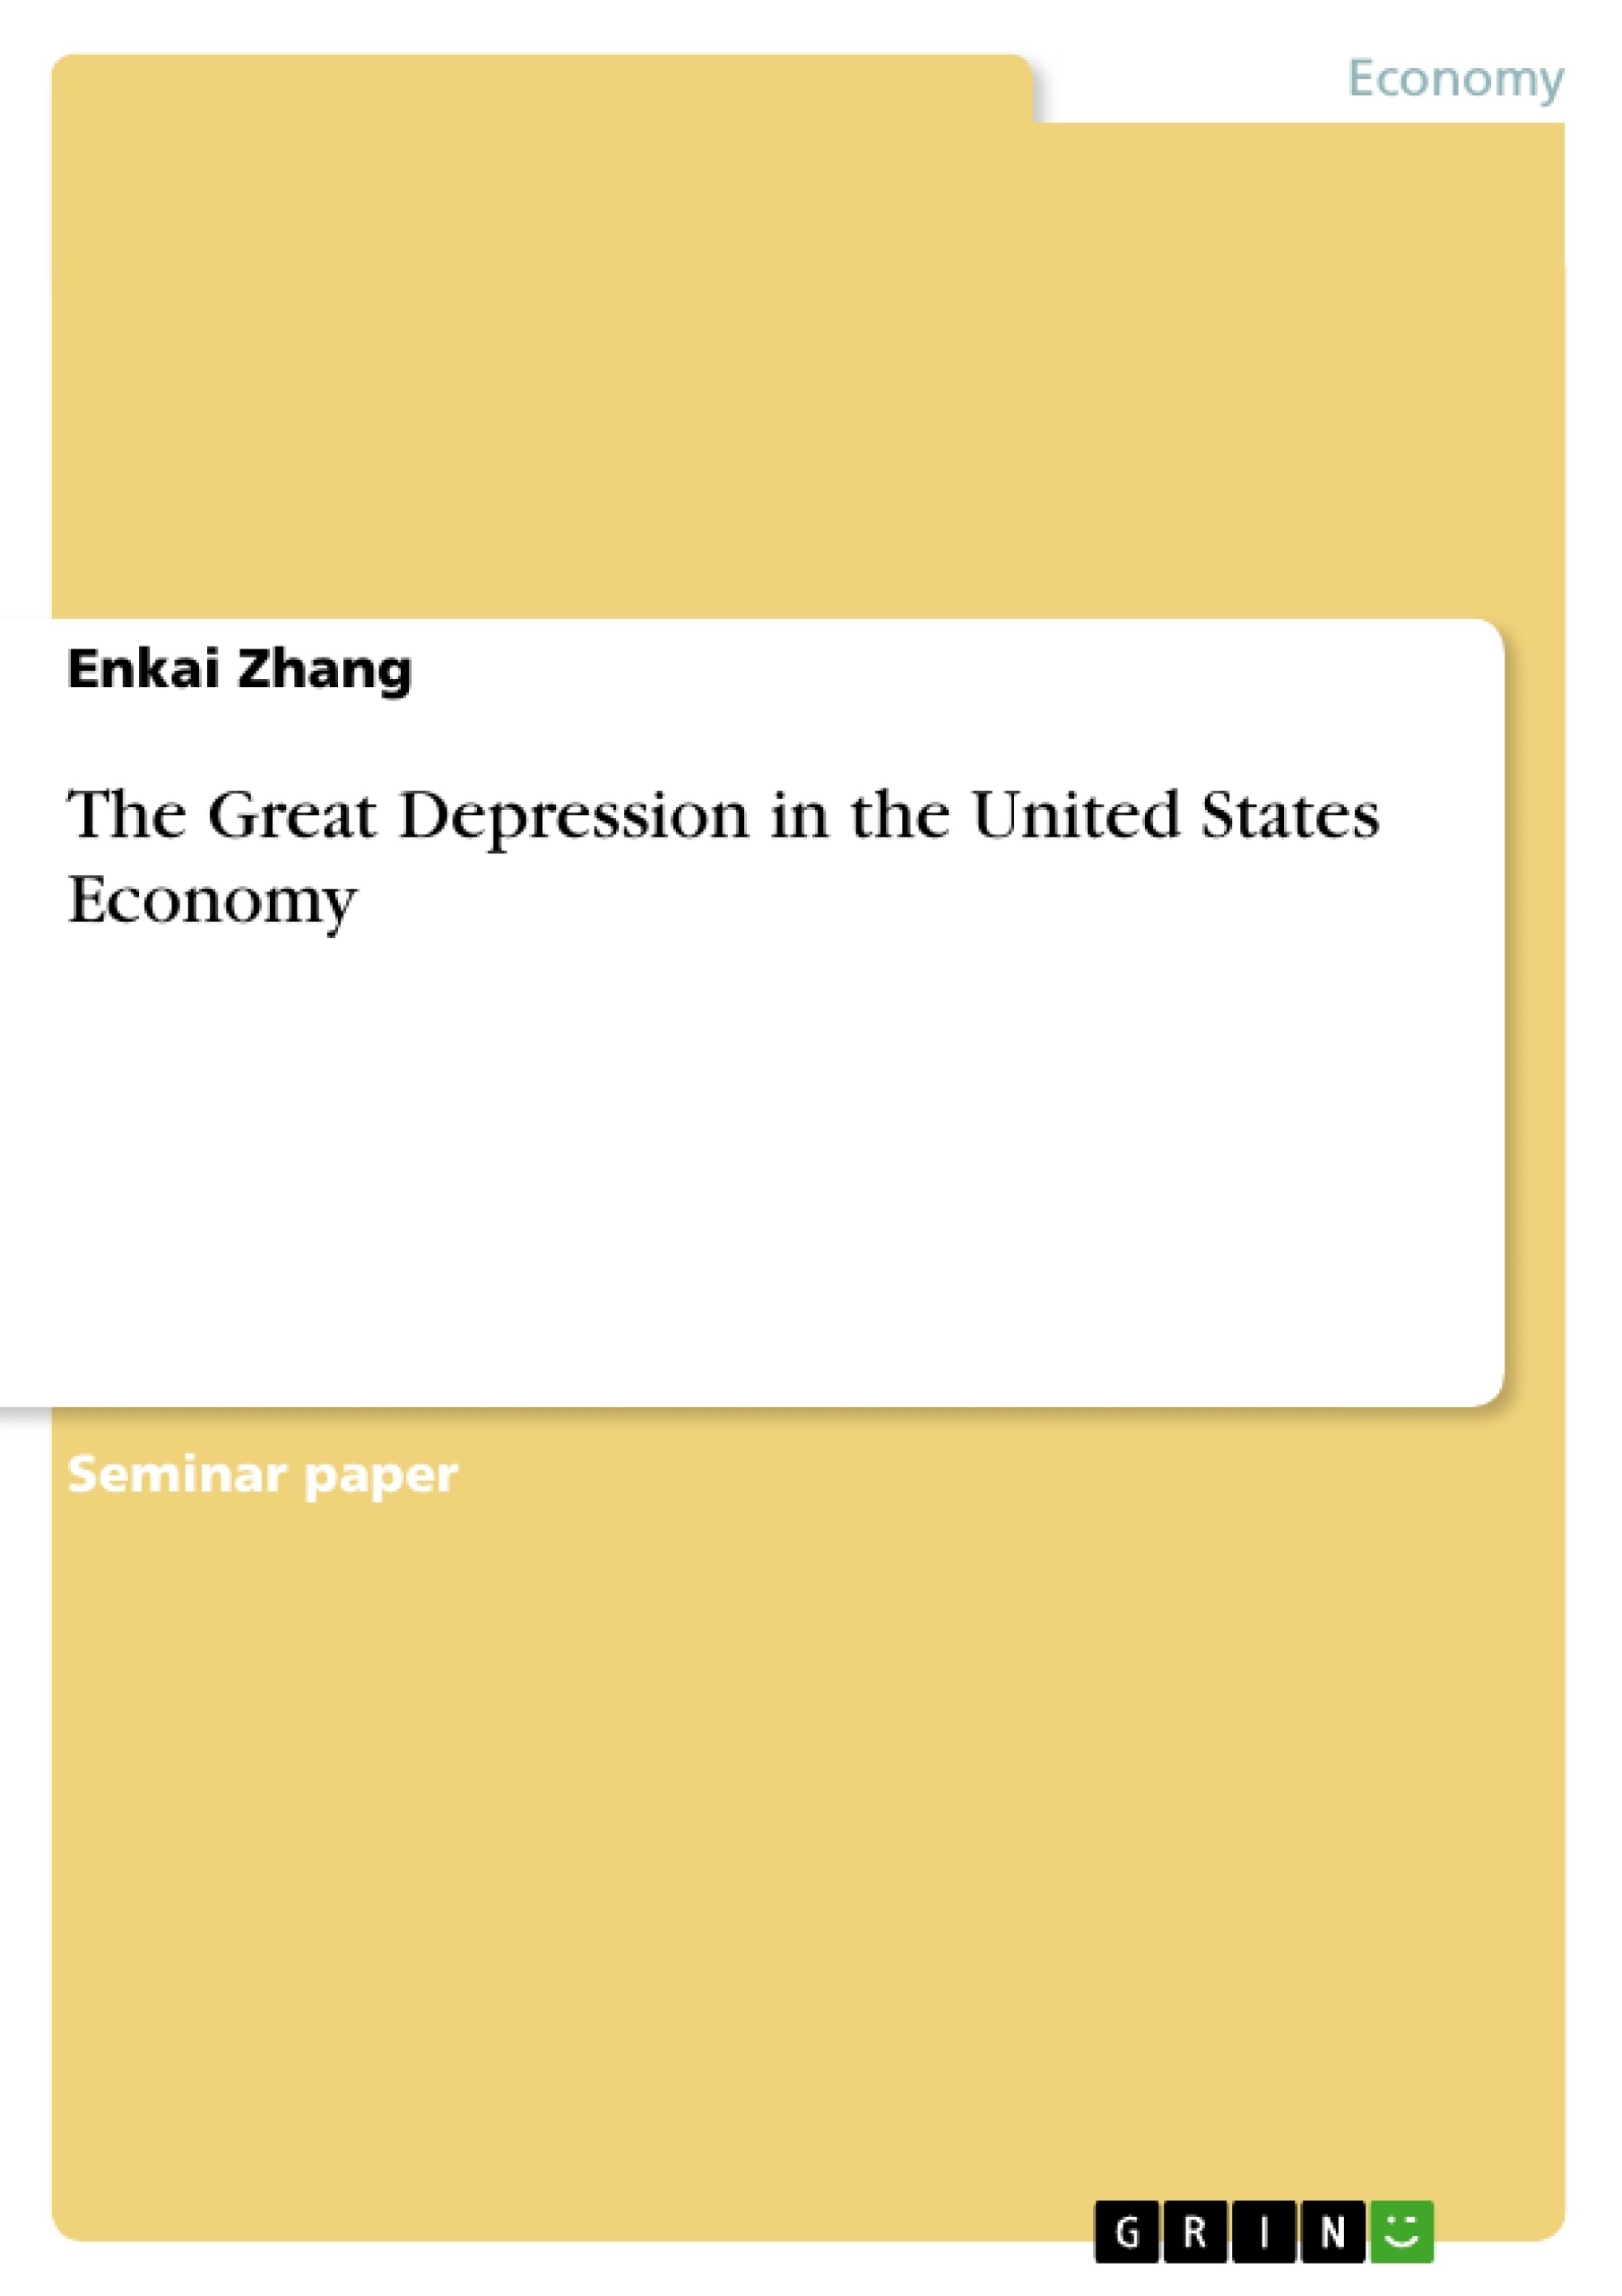 Title: The Great Depression in the United States Economy